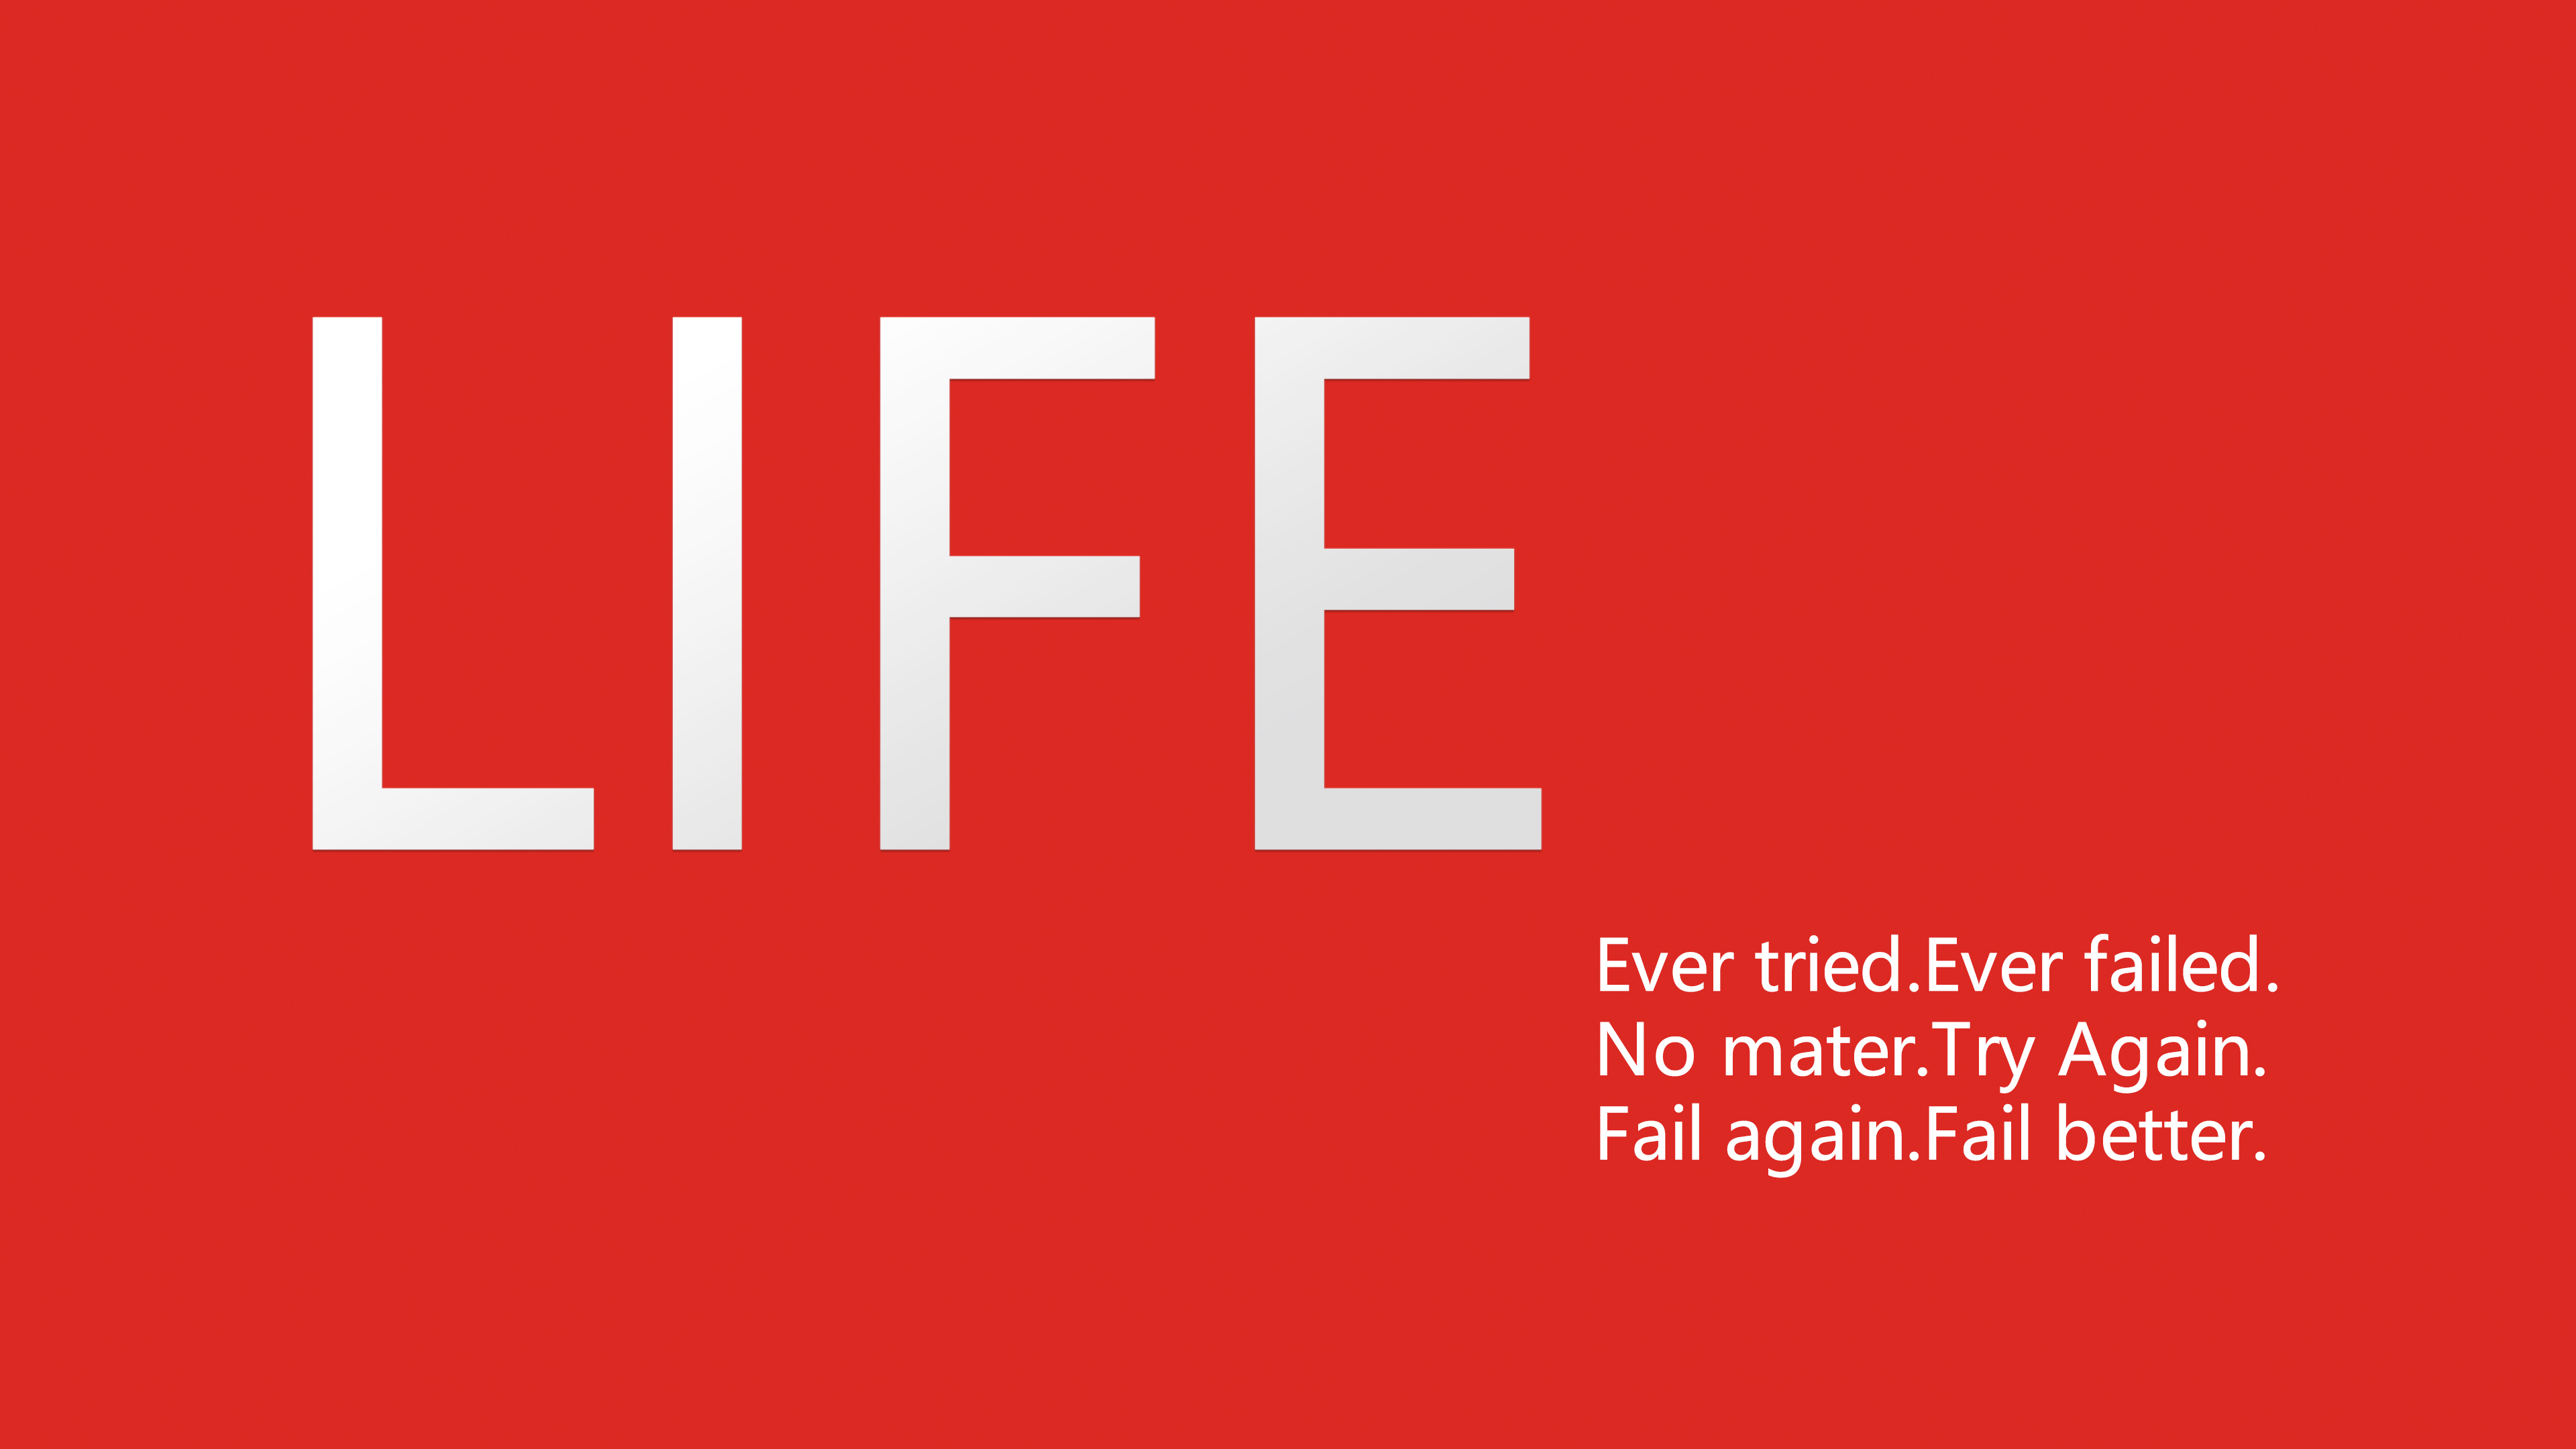 life, Give up, Red, Red background, Minimalism, Typography, Motivational, Poor english skills Wallpaper